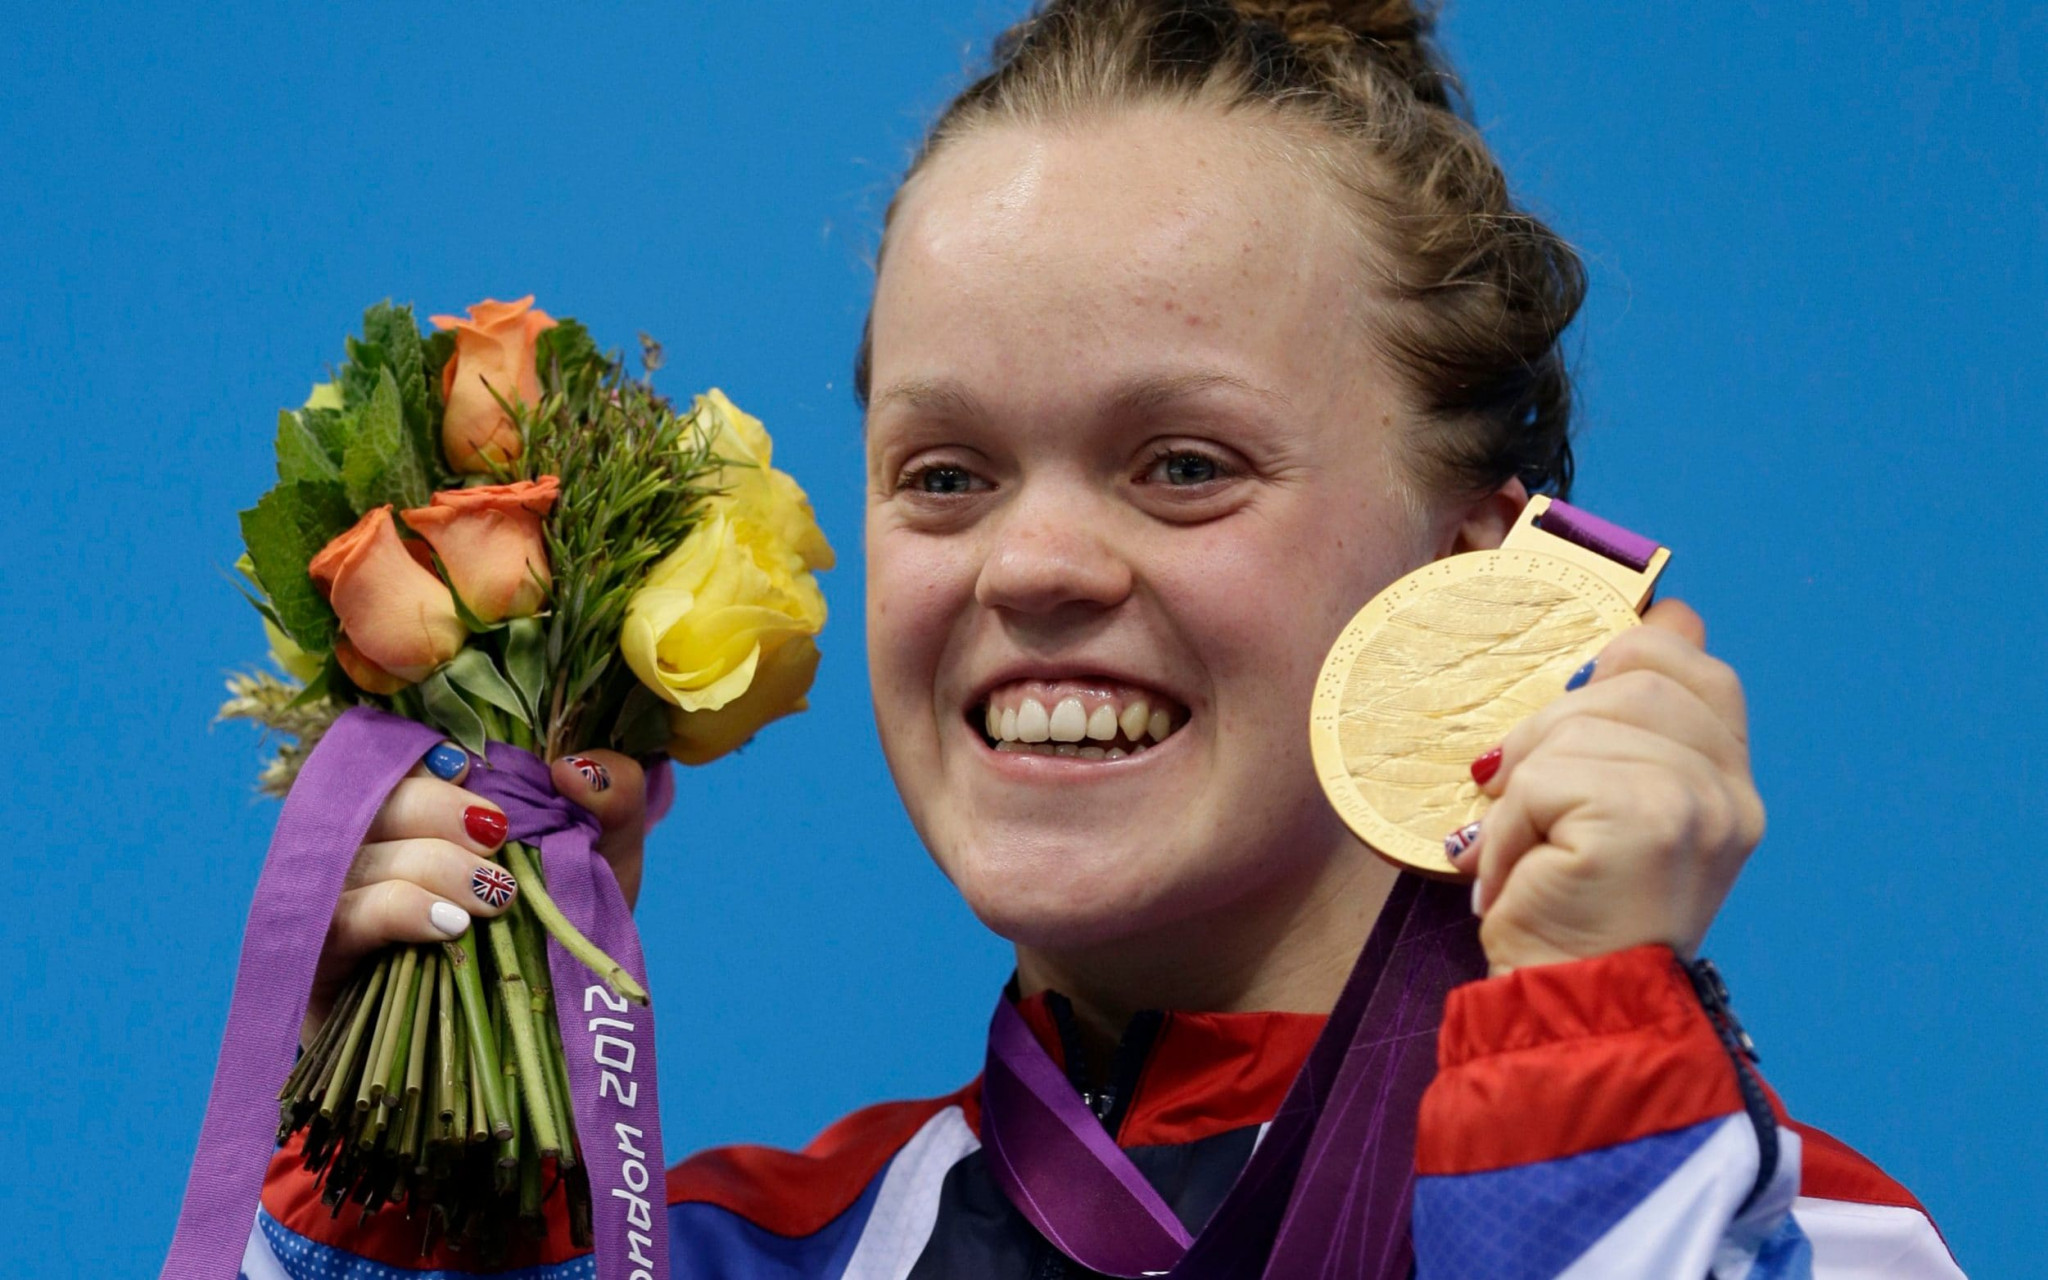 Ellie Simmonds is one of those on the Birmingham 2022 Board of Directors ©Getty Images